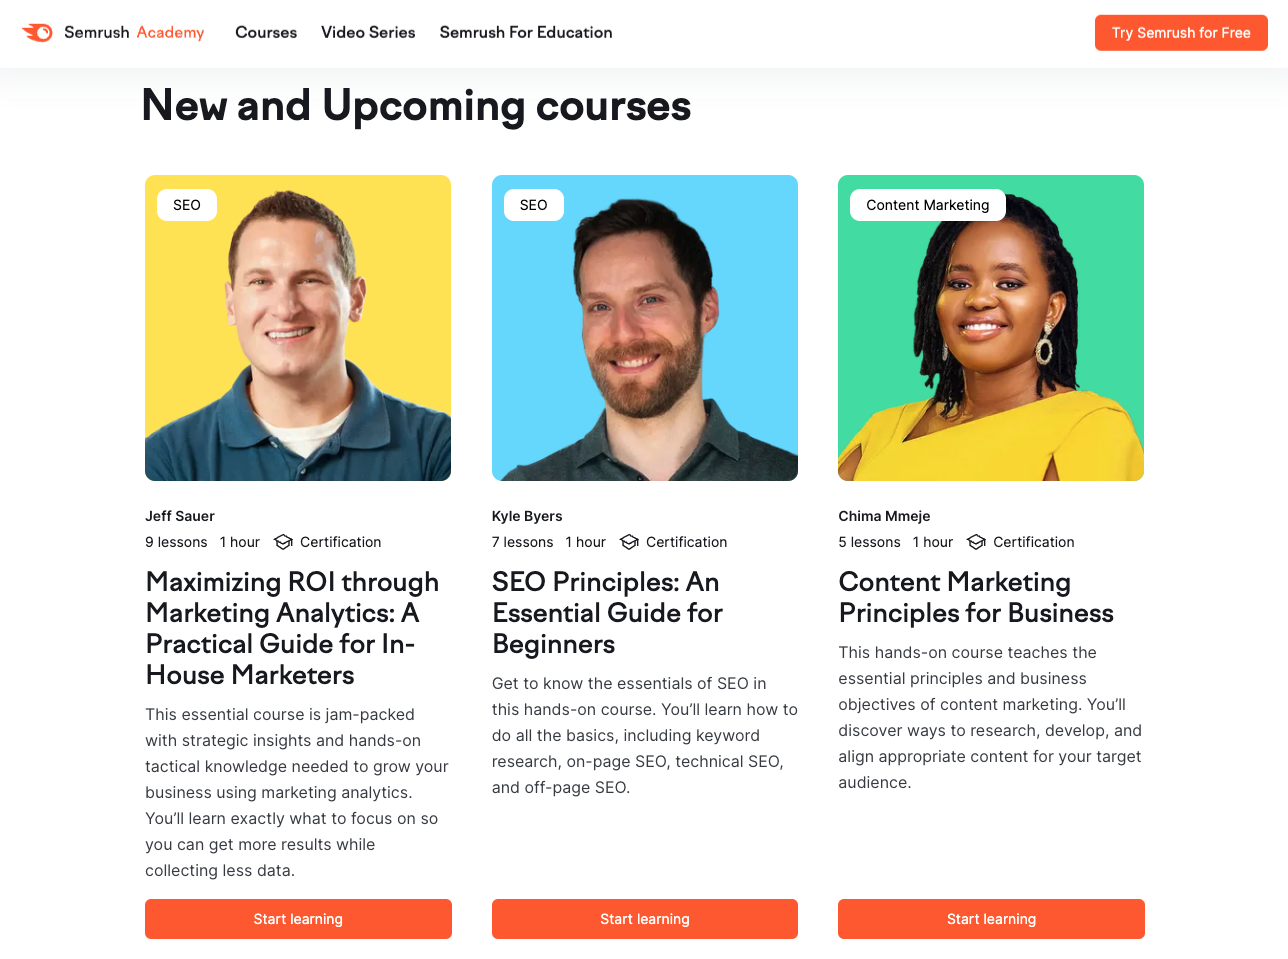 New and upcoming courses on Semrush Academy